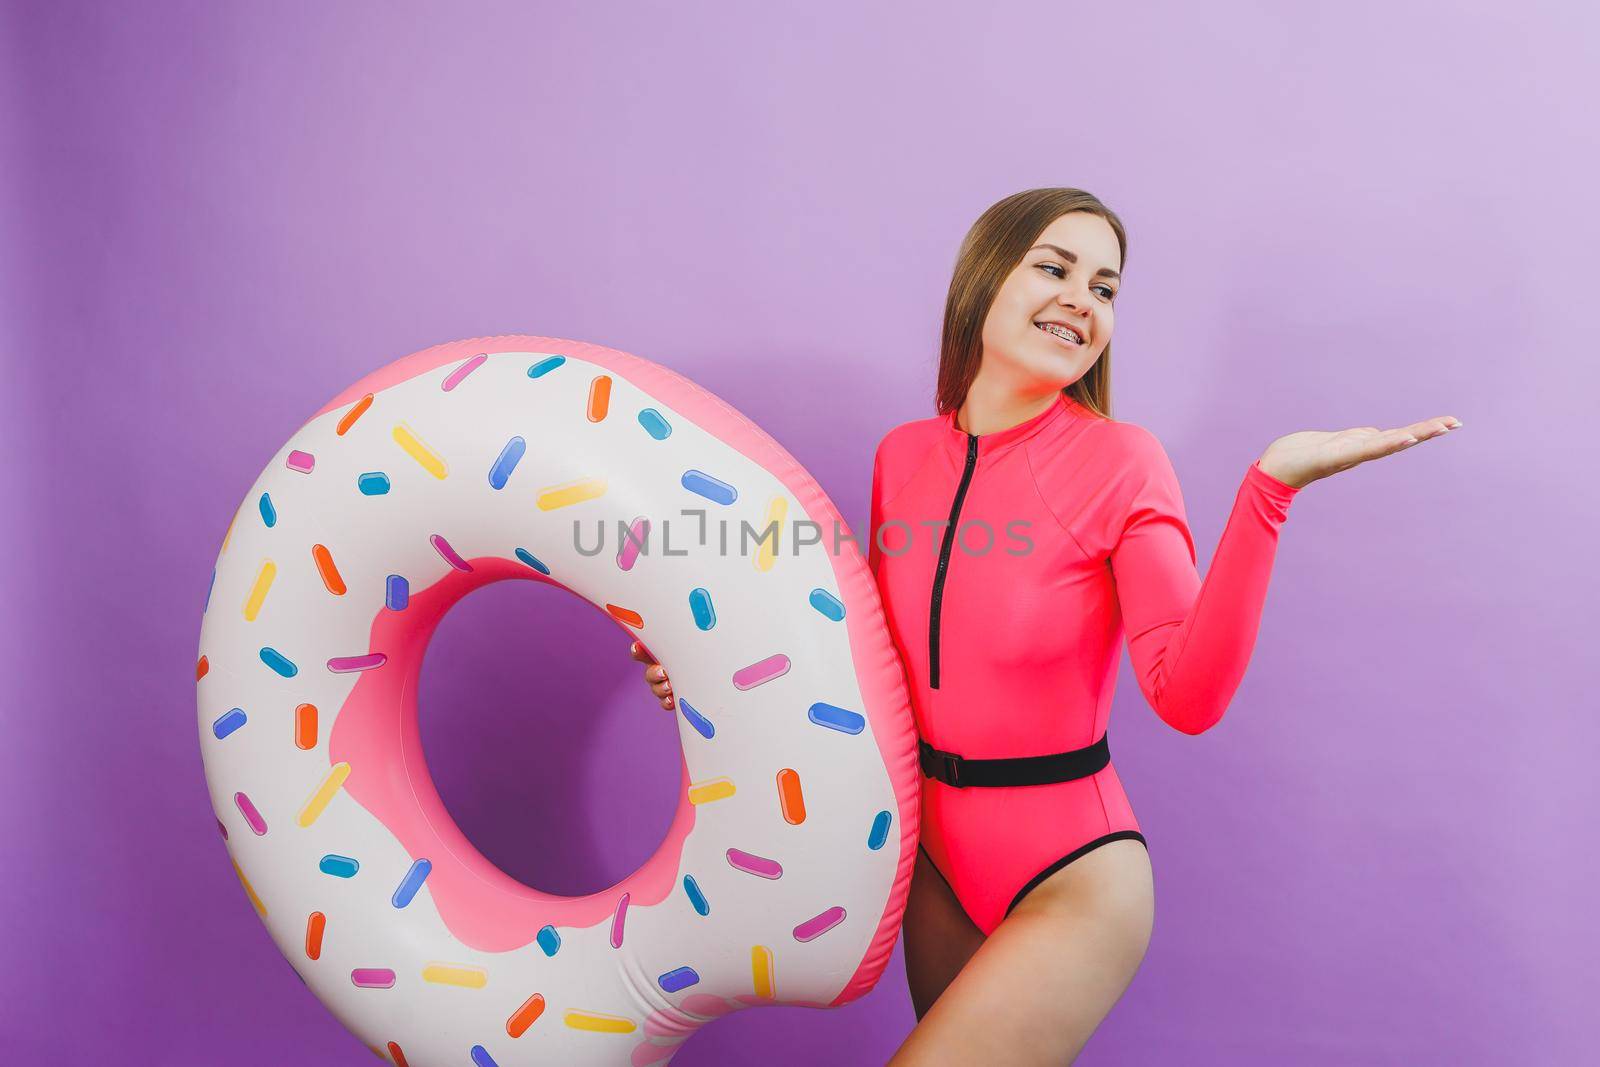 Slim young woman in a stylish pink swimsuit with a donut inflatable ring on a plain background.